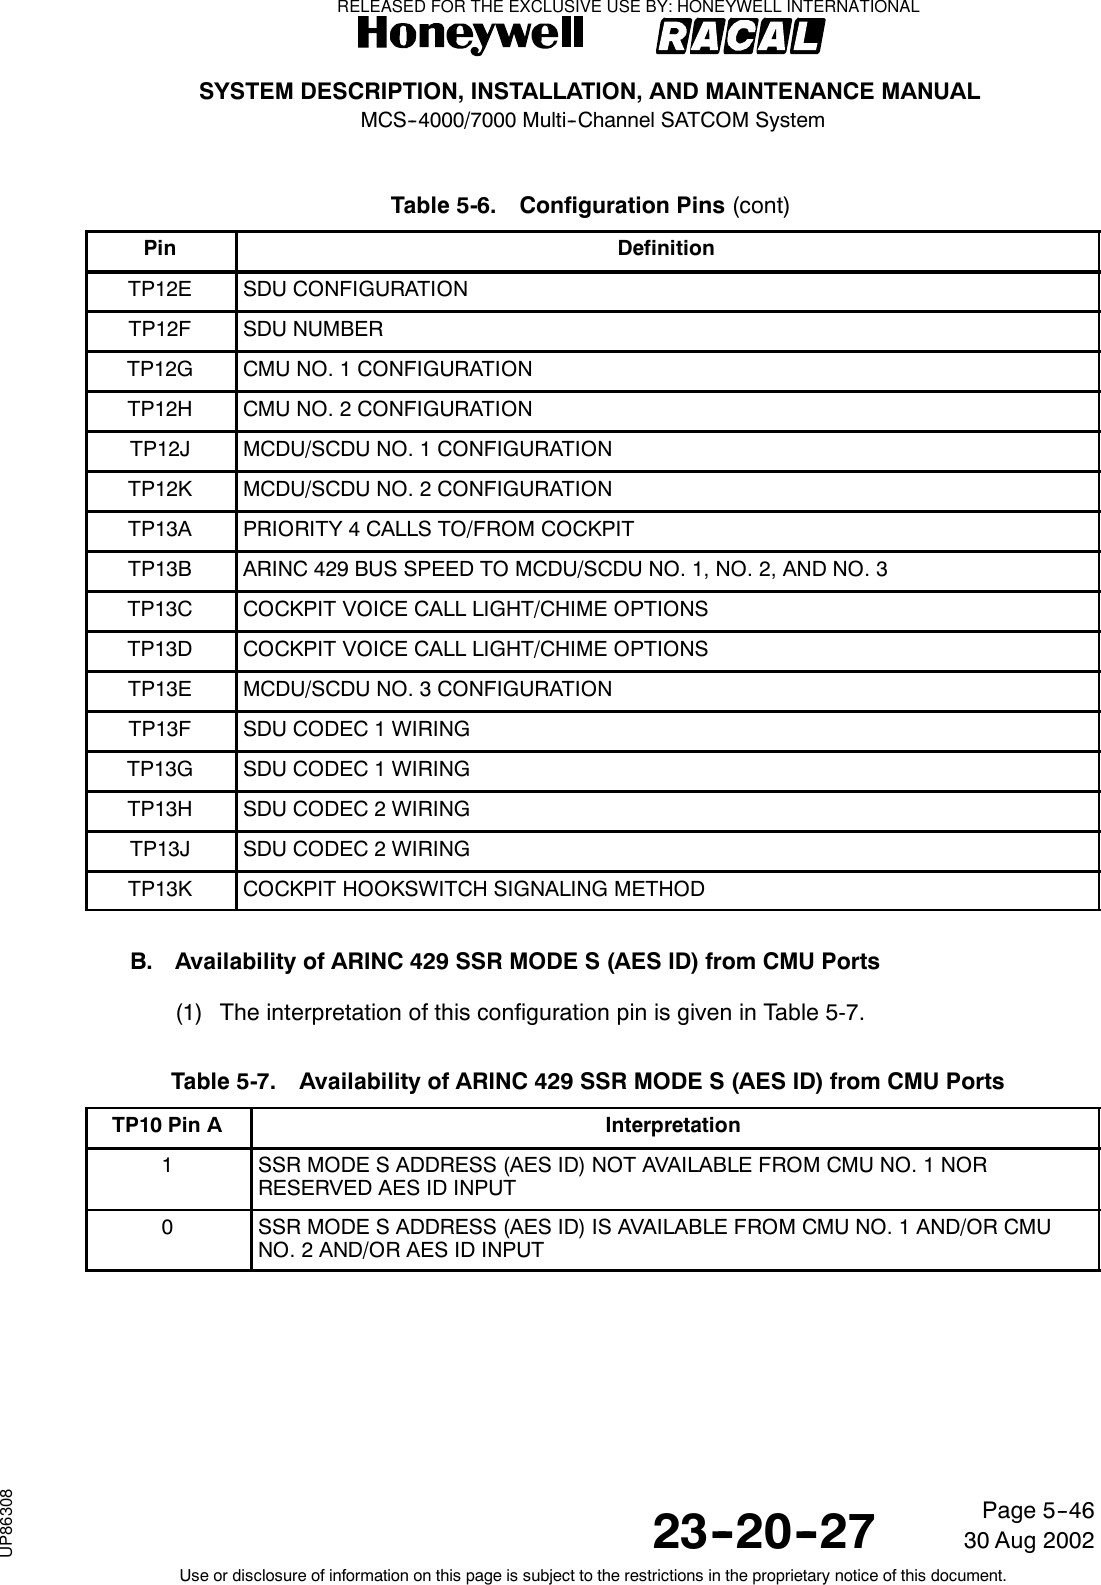 SYSTEM DESCRIPTION, INSTALLATION, AND MAINTENANCE MANUALMCS--4000/7000 Multi--Channel SATCOM System23--20--2730 Aug 2002Use or disclosure of information on this page is subject to the restrictions in the proprietary notice of this document.Page 5--46Table 5-6. Configuration Pins (cont)Pin DefinitionTP12E SDU CONFIGURATIONTP12F SDU NUMBERTP12G CMU NO. 1 CONFIGURATIONTP12H CMU NO. 2 CONFIGURATIONTP12J MCDU/SCDU NO. 1 CONFIGURATIONTP12K MCDU/SCDU NO. 2 CONFIGURATIONTP13A PRIORITY 4 CALLS TO/FROM COCKPITTP13B ARINC 429 BUS SPEED TO MCDU/SCDU NO. 1, NO. 2, AND NO. 3TP13C COCKPIT VOICE CALL LIGHT/CHIME OPTIONSTP13D COCKPIT VOICE CALL LIGHT/CHIME OPTIONSTP13E MCDU/SCDU NO. 3 CONFIGURATIONTP13F SDU CODEC 1 WIRINGTP13G SDU CODEC 1 WIRINGTP13H SDU CODEC 2 WIRINGTP13J SDU CODEC 2 WIRINGTP13K COCKPIT HOOKSWITCH SIGNALING METHODB. Availability of ARINC 429 SSR MODE S (AES ID) from CMU Ports(1) The interpretation of this configuration pin is given in Table 5-7.Table 5-7. Availability of ARINC 429 SSR MODE S (AES ID) from CMU PortsTP10 Pin A Interpretation1SSR MODE S ADDRESS (AES ID) NOT AVAILABLE FROM CMU NO. 1 NORRESERVED AES ID INPUT0SSR MODE S ADDRESS (AES ID) IS AVAILABLE FROM CMU NO. 1 AND/OR CMUNO. 2 AND/OR AES ID INPUTRELEASED FOR THE EXCLUSIVE USE BY: HONEYWELL INTERNATIONALUP86308